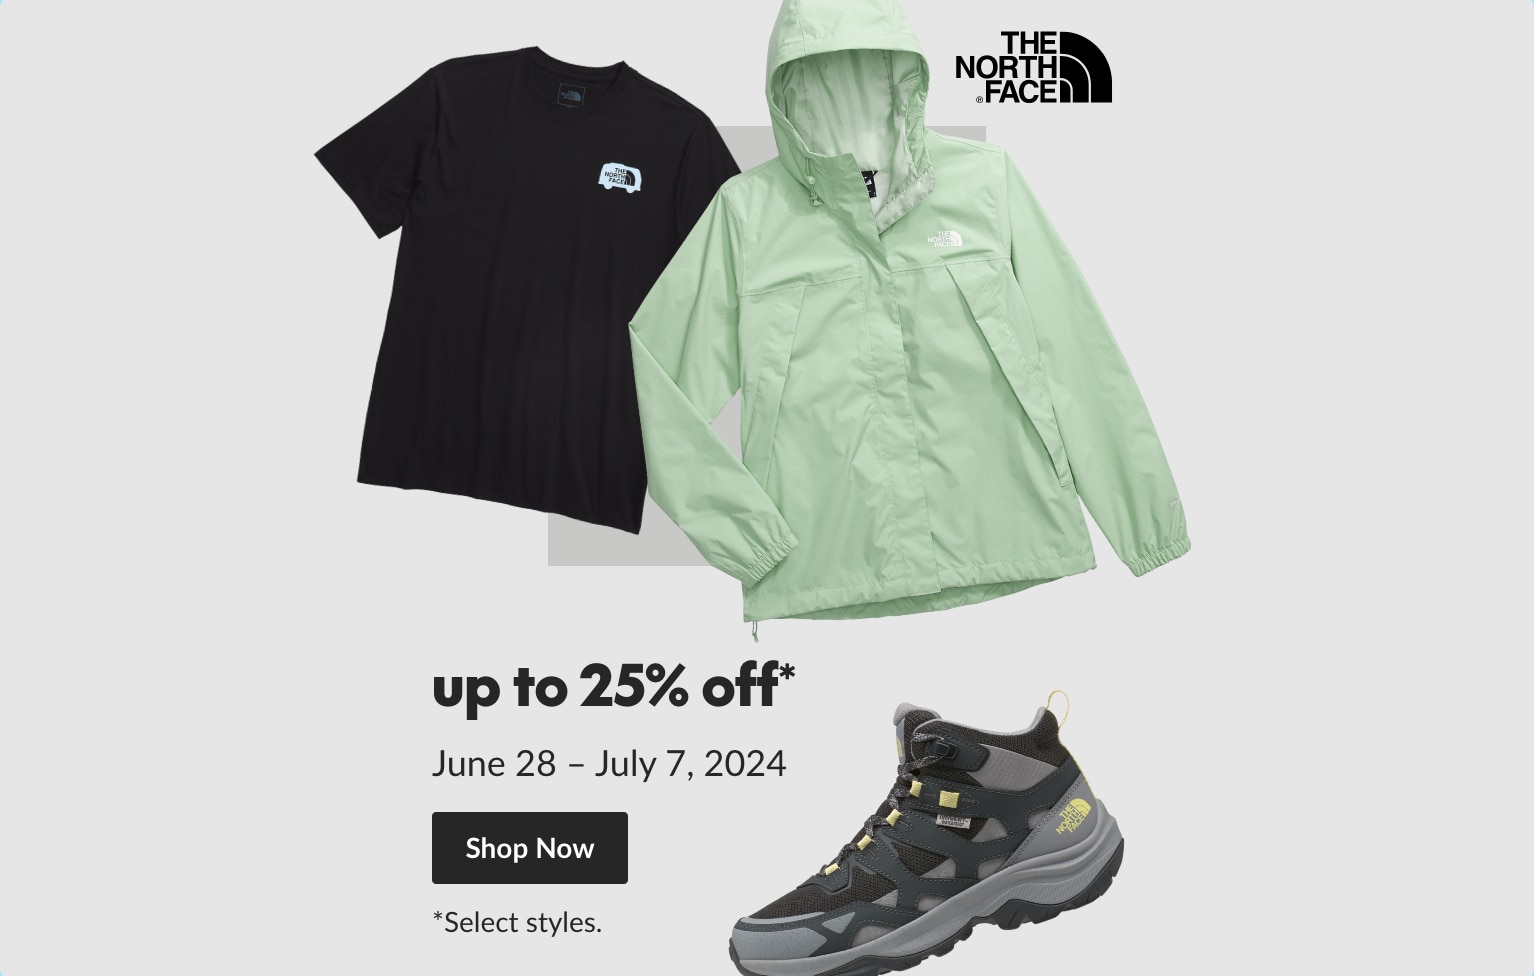 Take up to 25% off The North Face products from June 28 - July 7, 2024. Select styles.